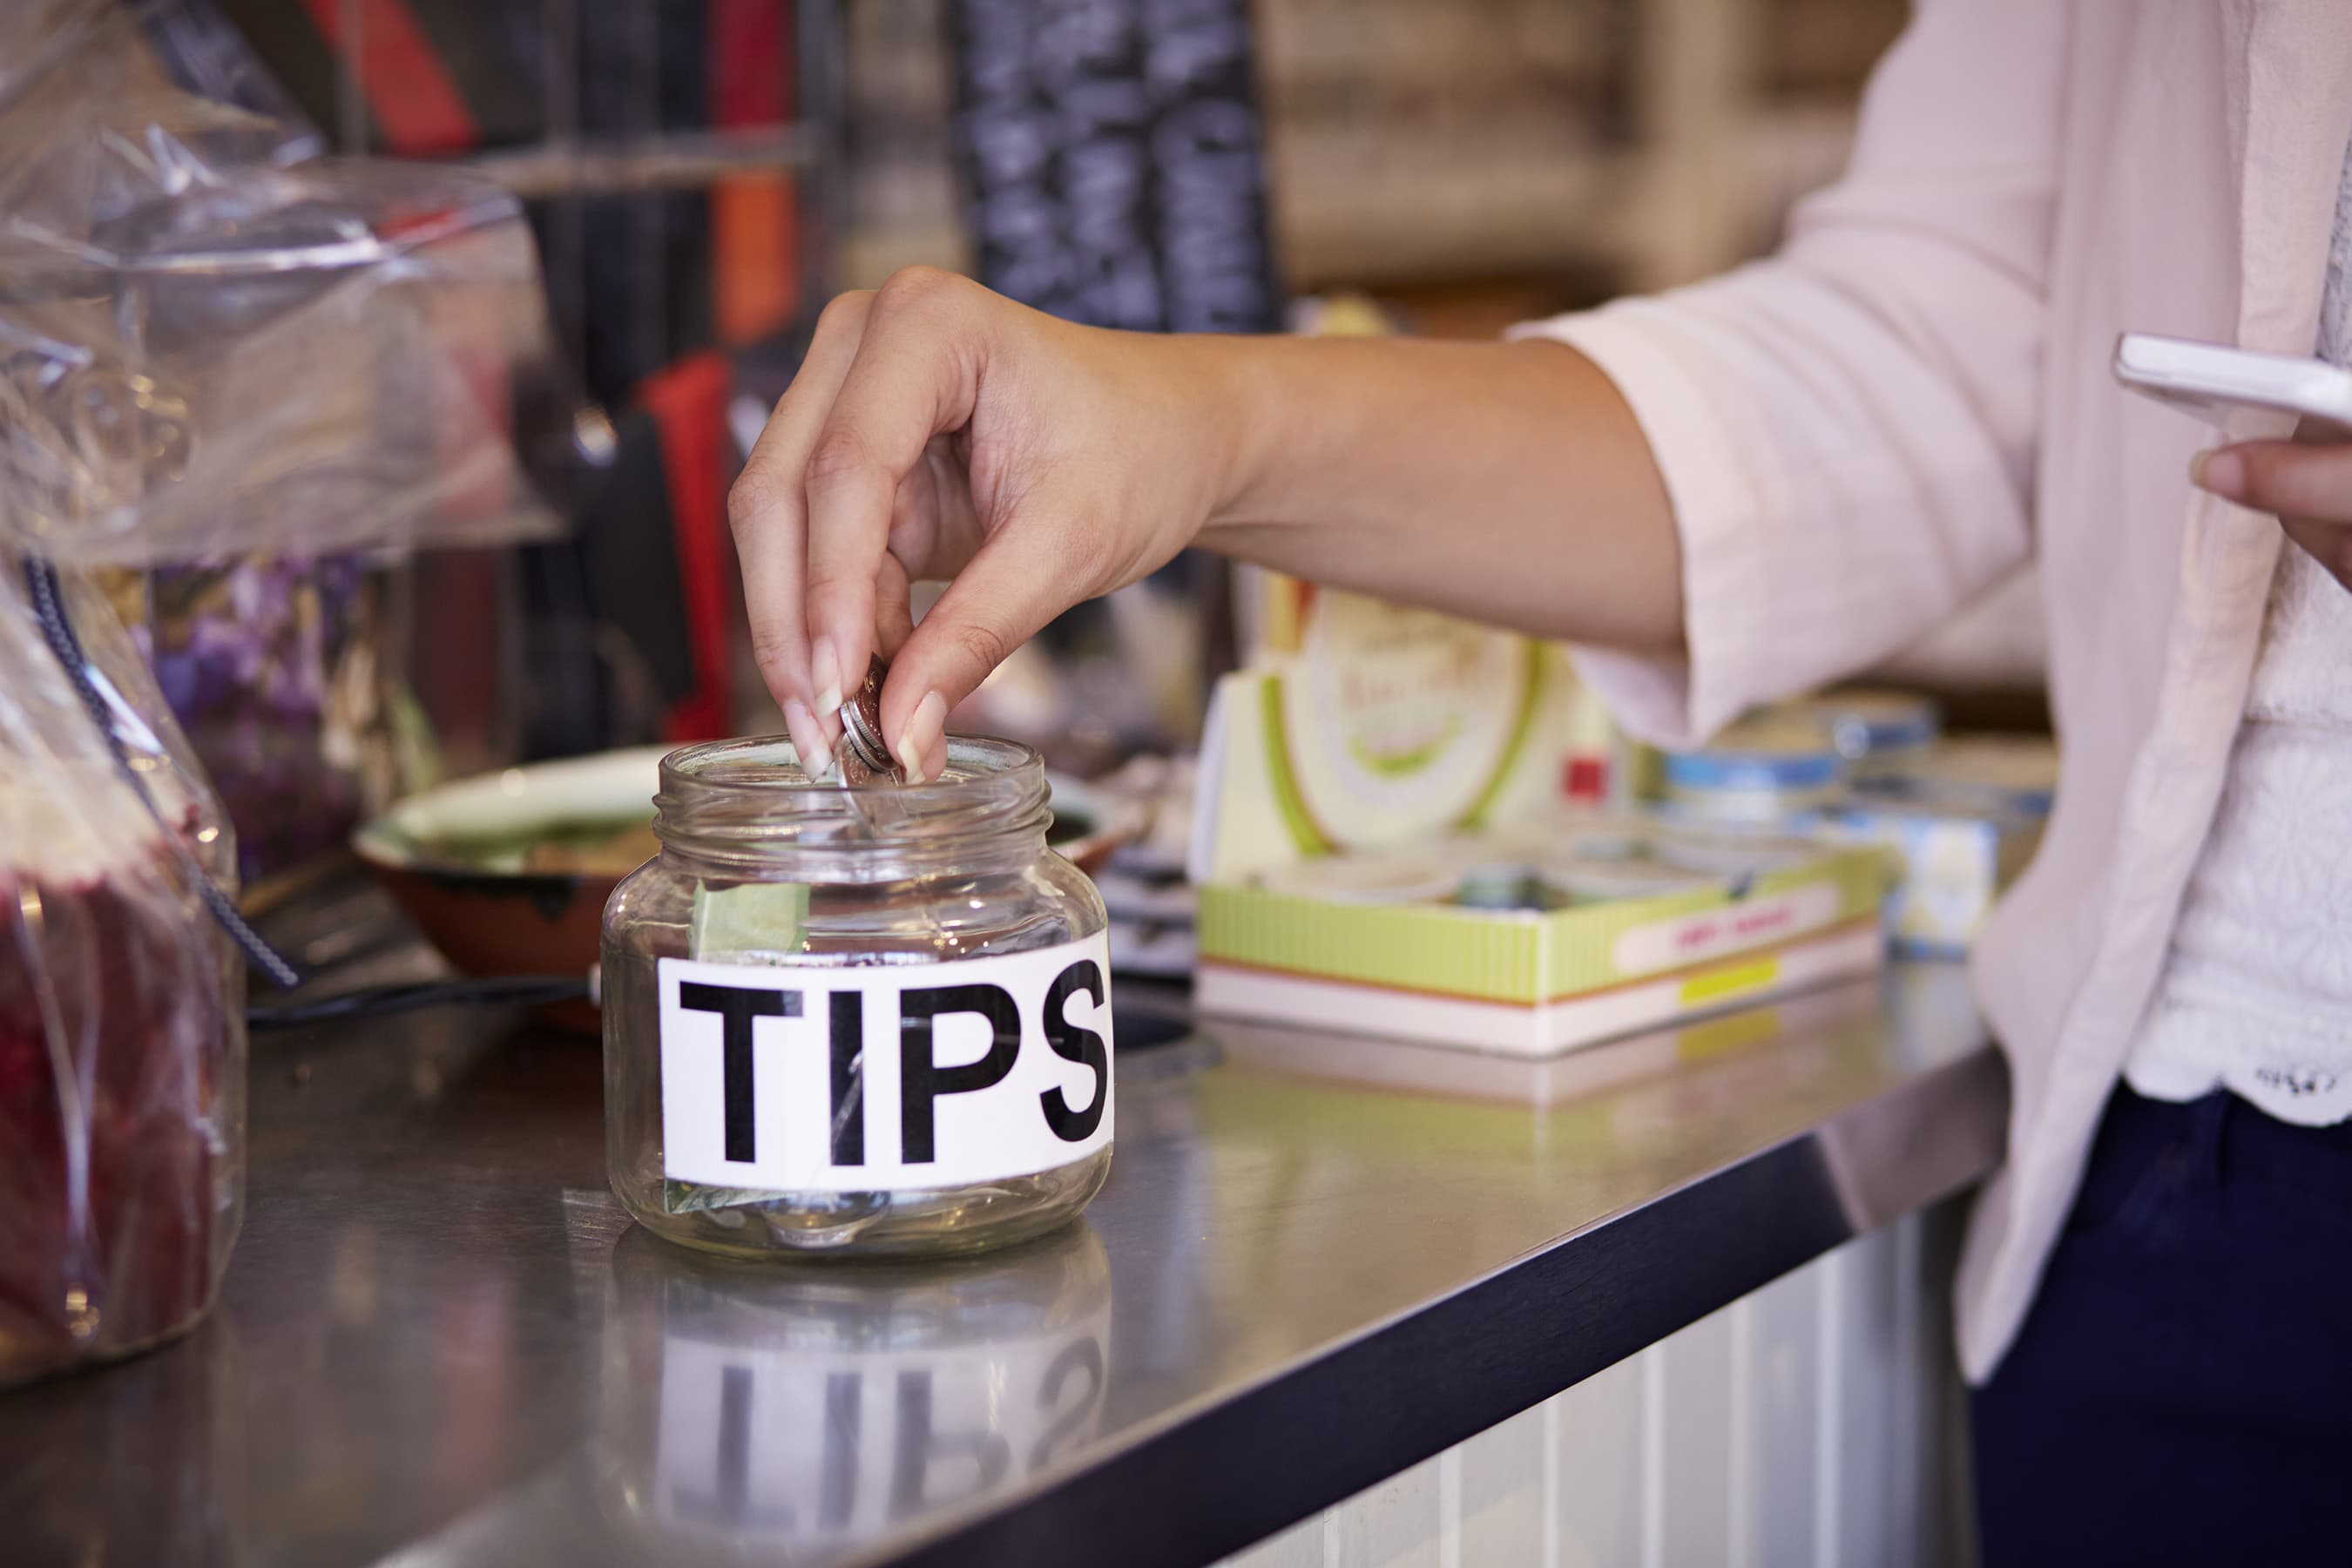 How Much Is A Tip Card